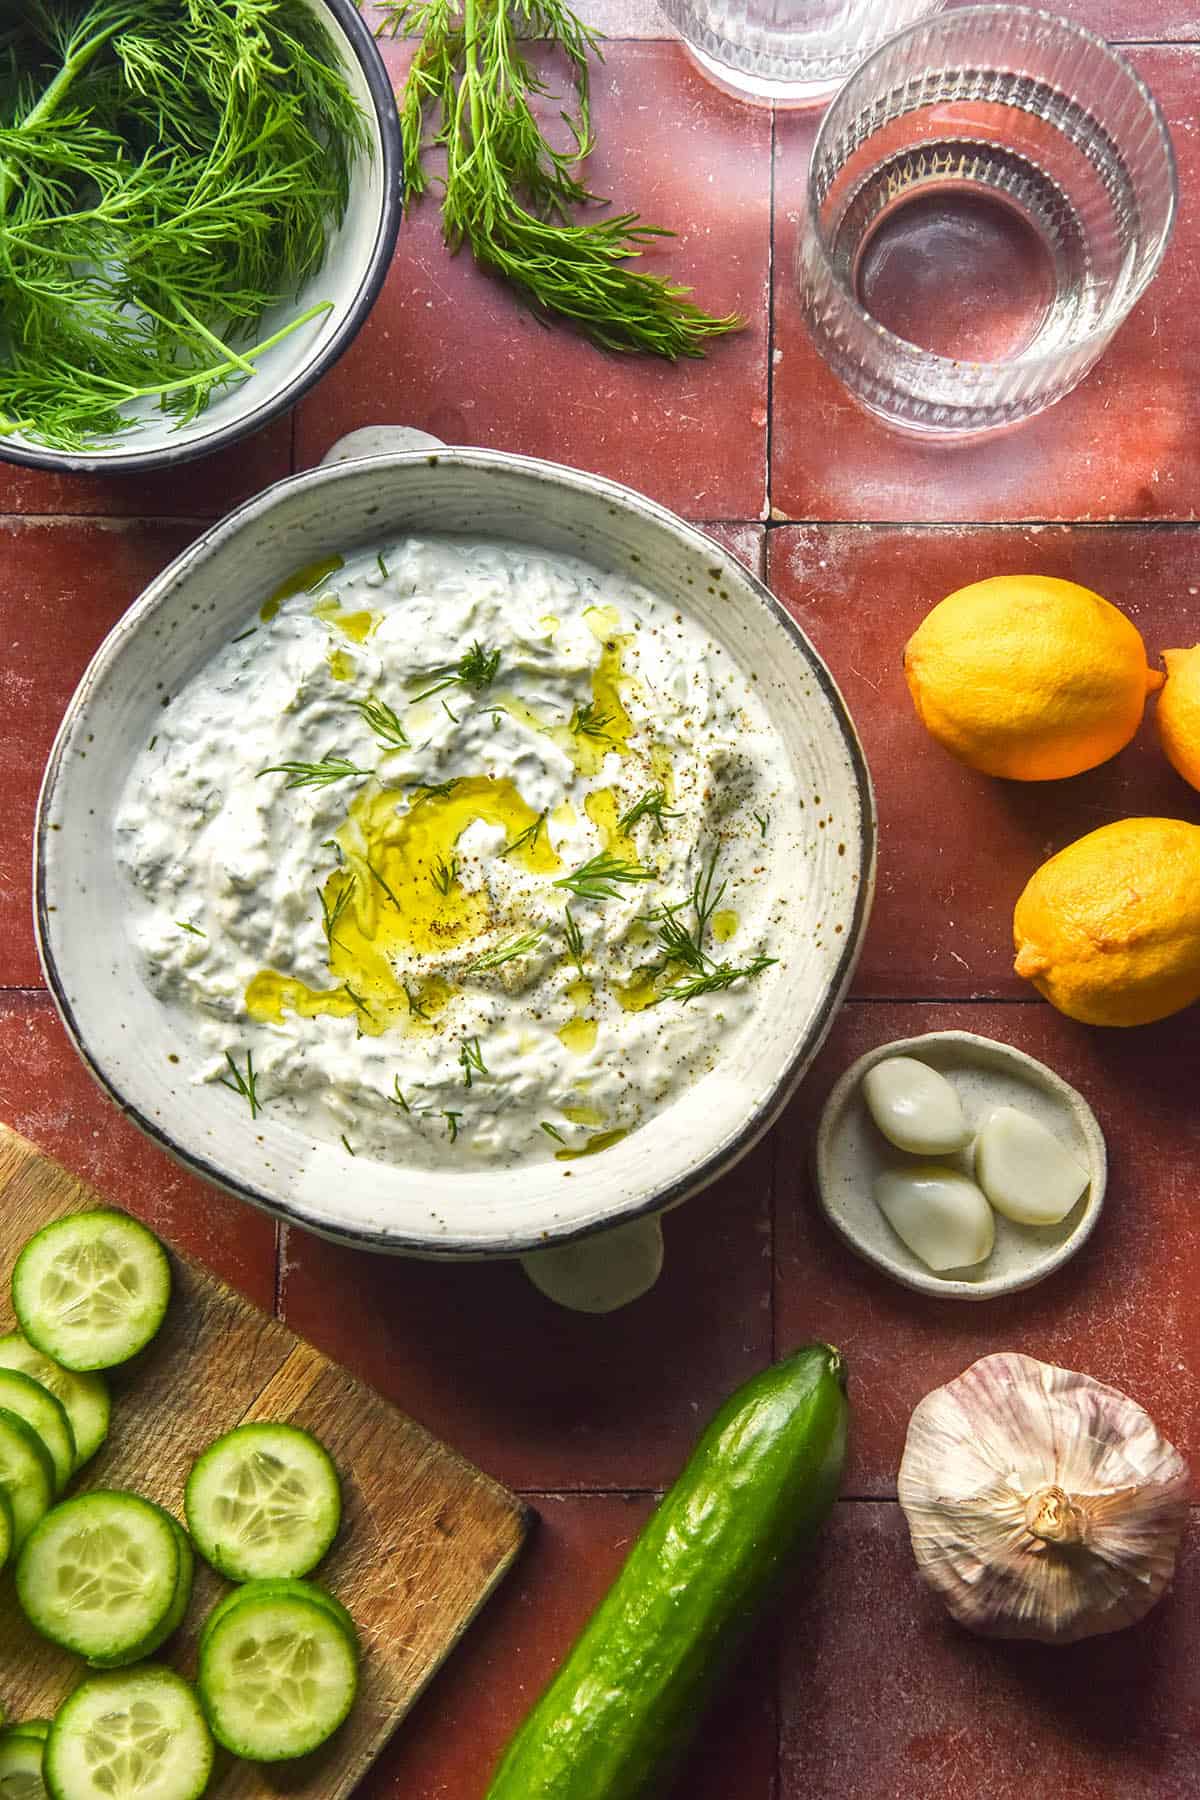 An aerial image of a white ceramic bowl filled with low FODMAP tzatziki on a terracotta tile backdrop. The tzatziki is surrounded by the ingredients used to make the dip as well as two sunlit glasses of water in the top right corner.